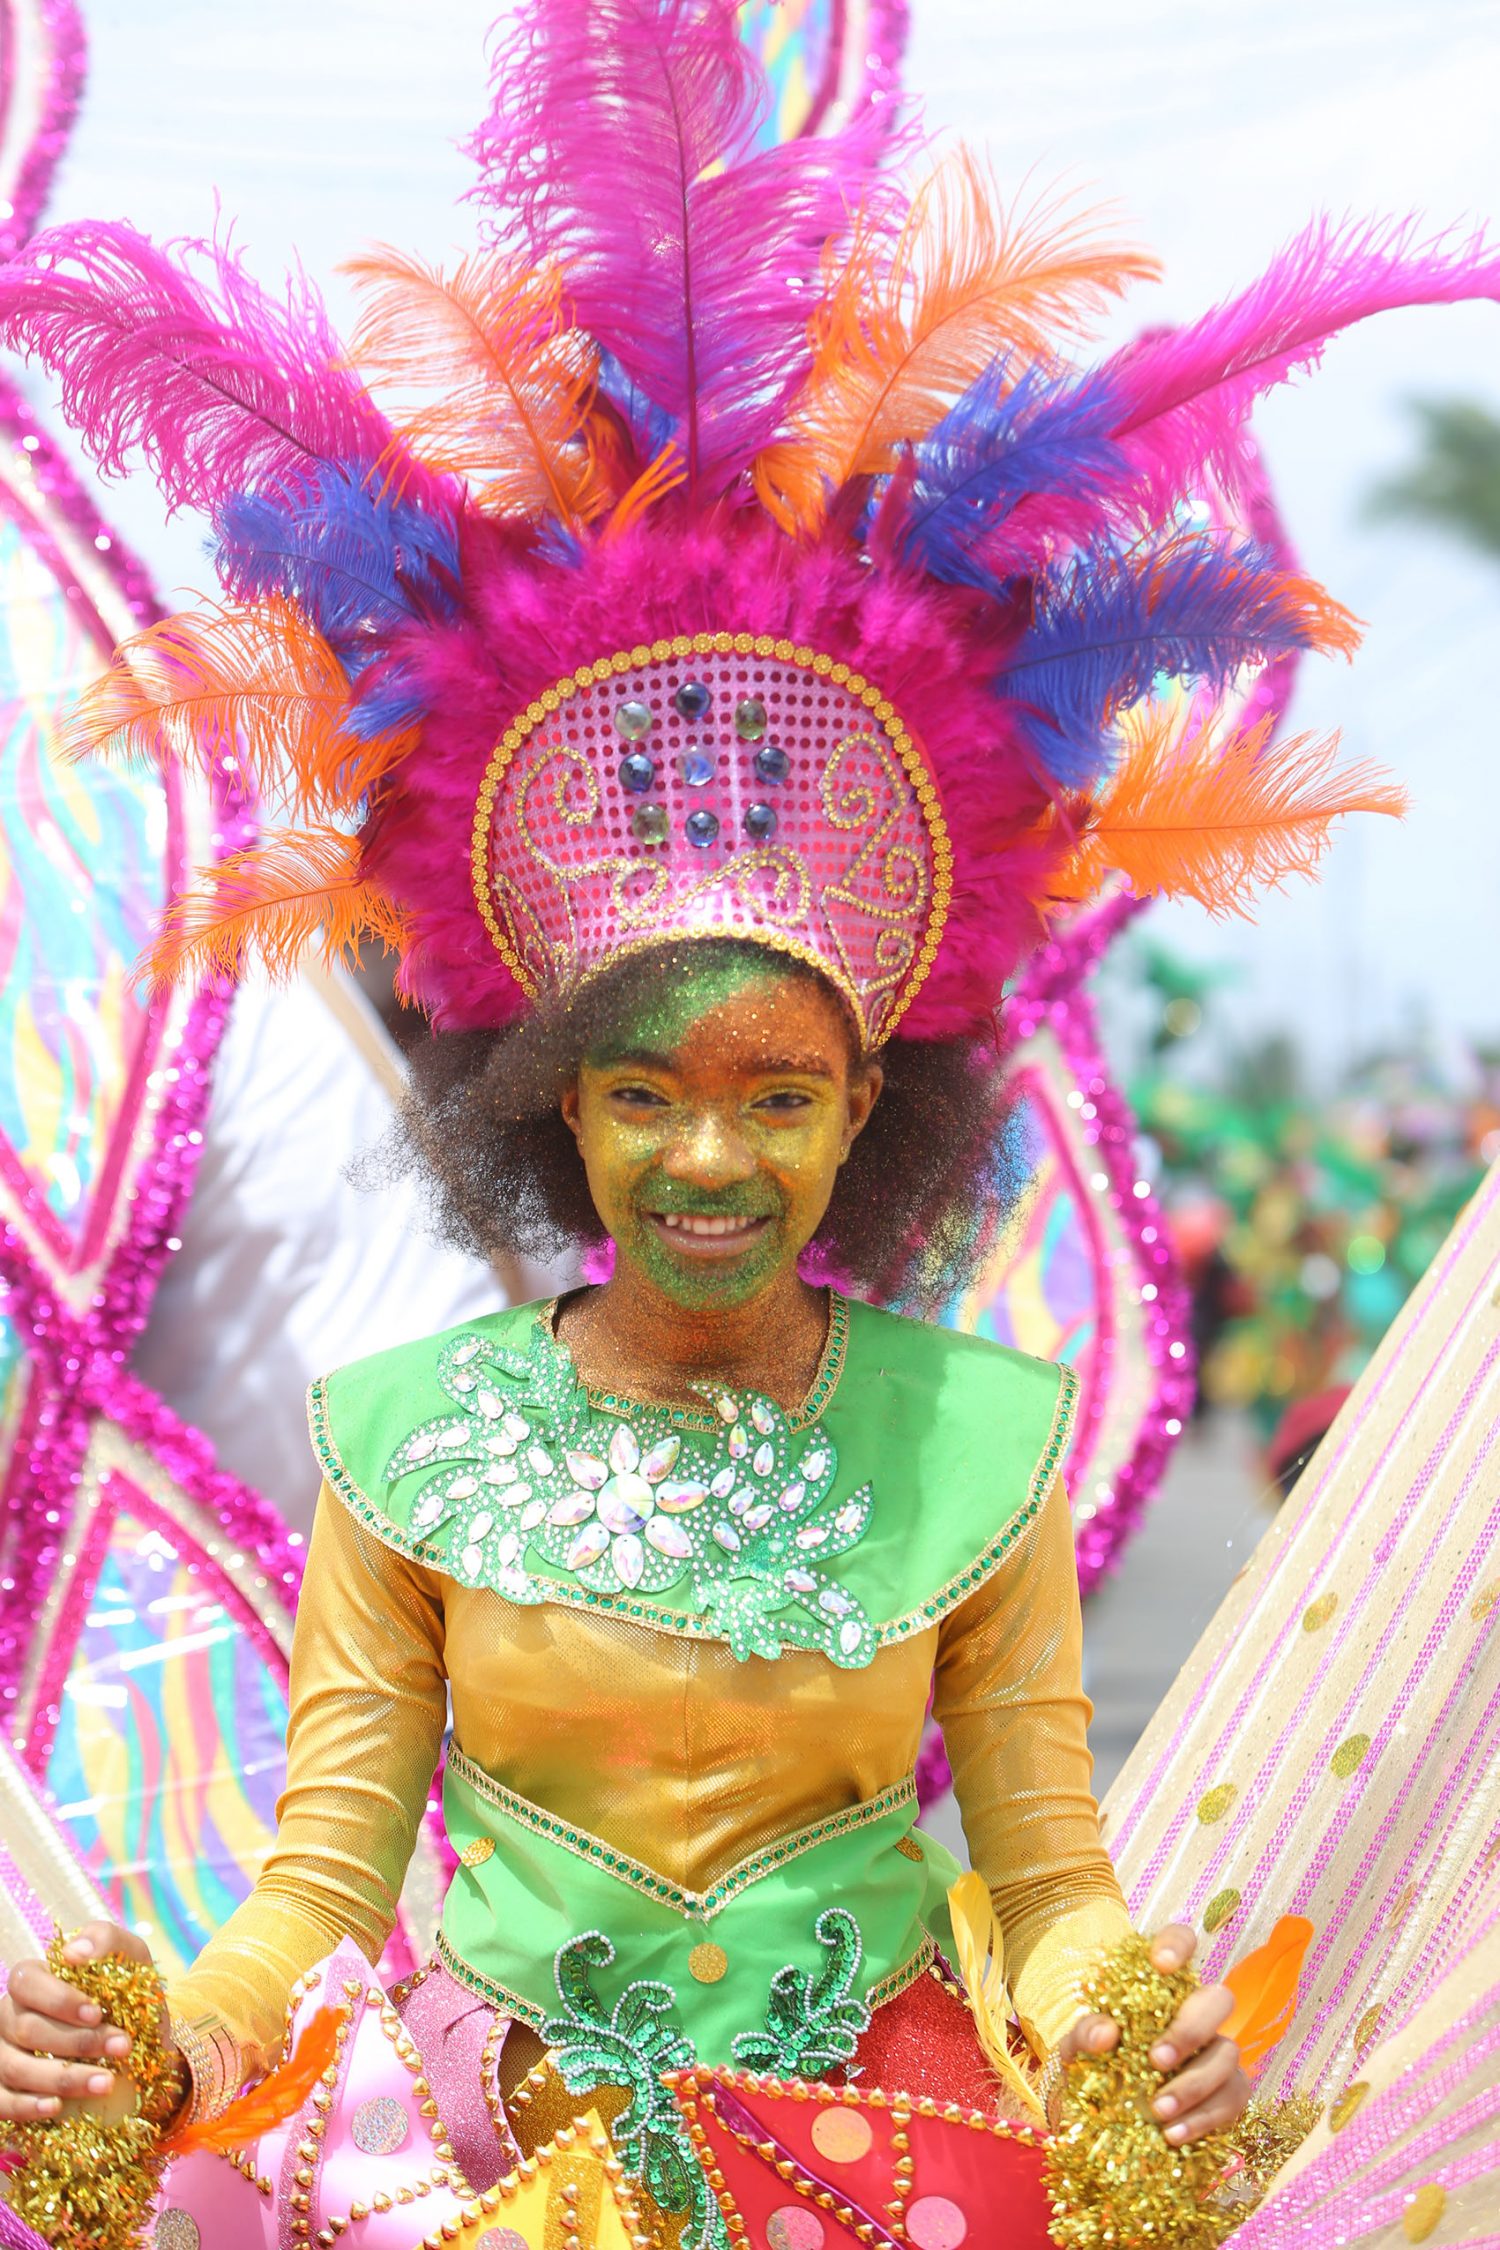 A North Georgetown Primary student leading the school’s ‘Frolic in the Sun’ band during the Children’s Mashramani Costume and Float parade yesterday. See centre pages for more photos. (Photo by Keno George)